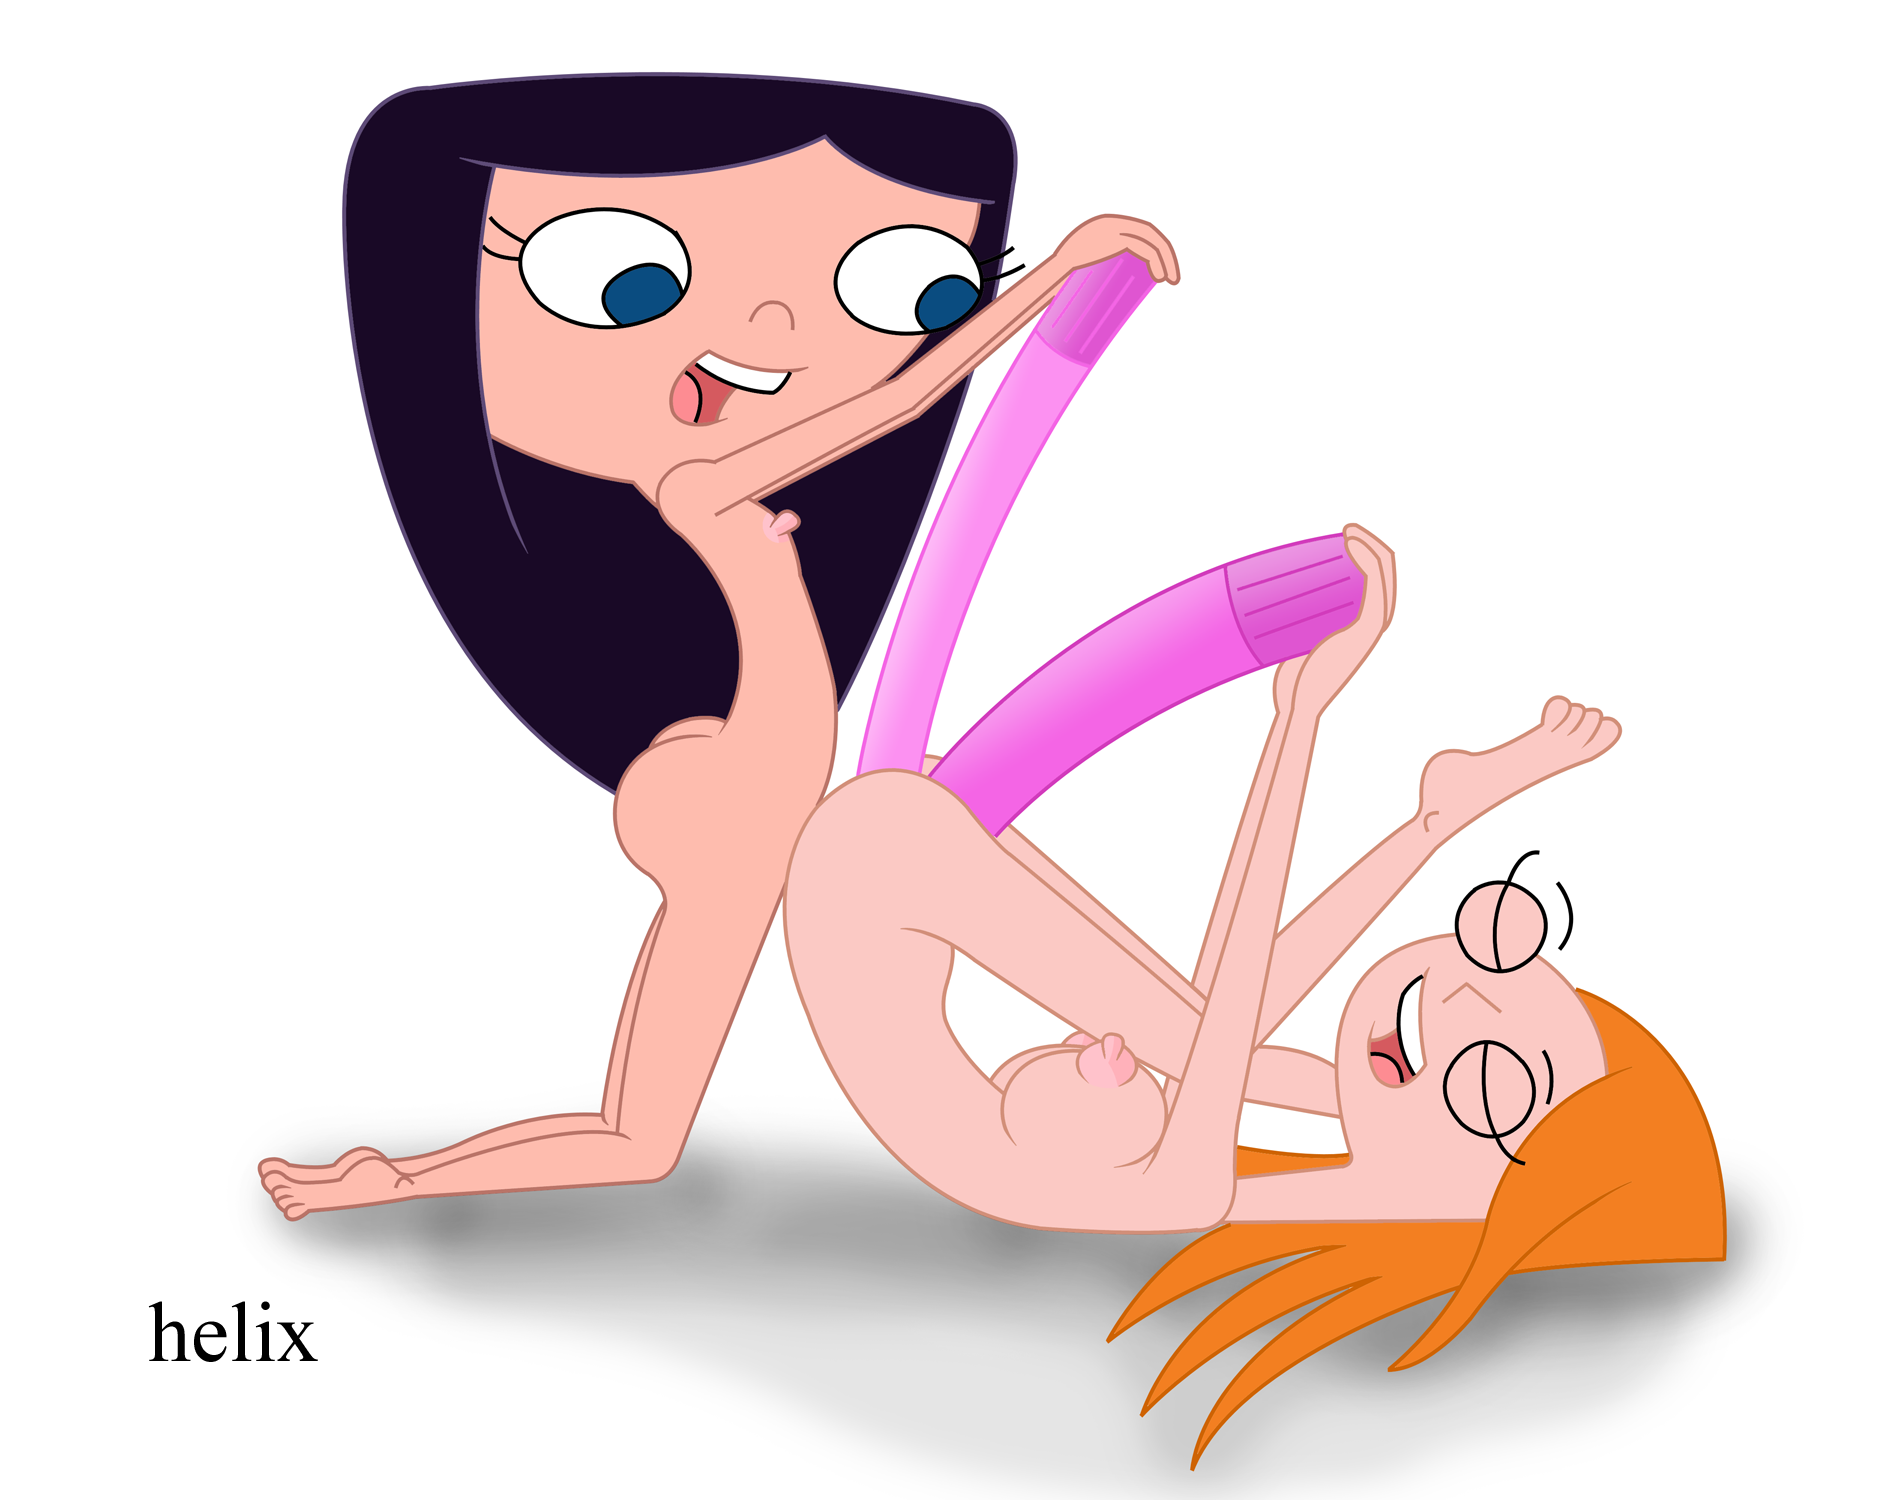 Phineas And Ferb Porn Pics